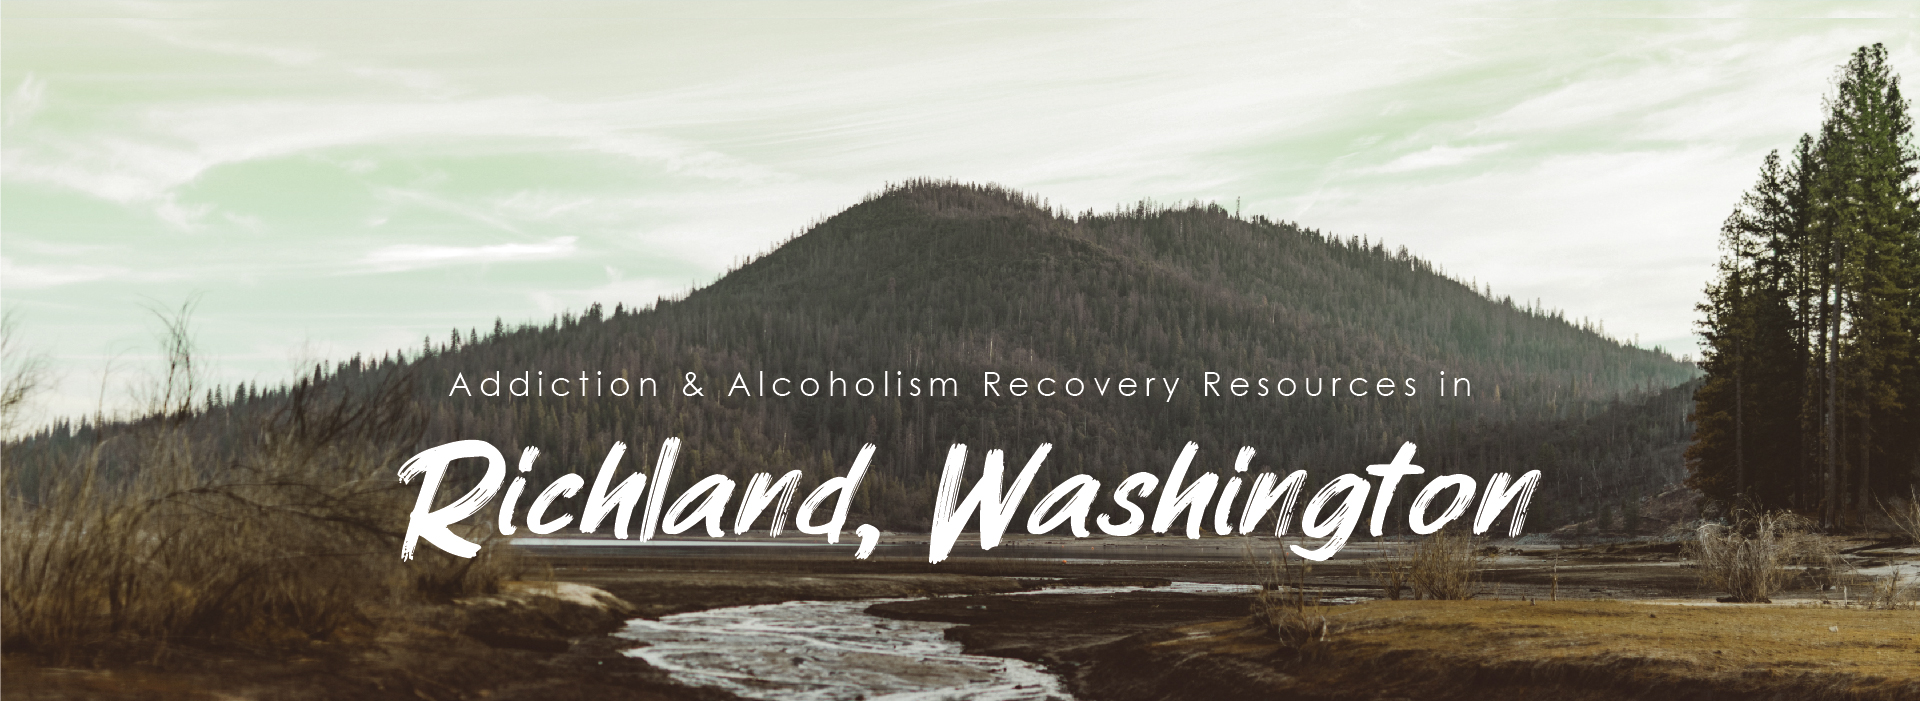 Addiction and alcoholism recovery resources in Richland, Washington